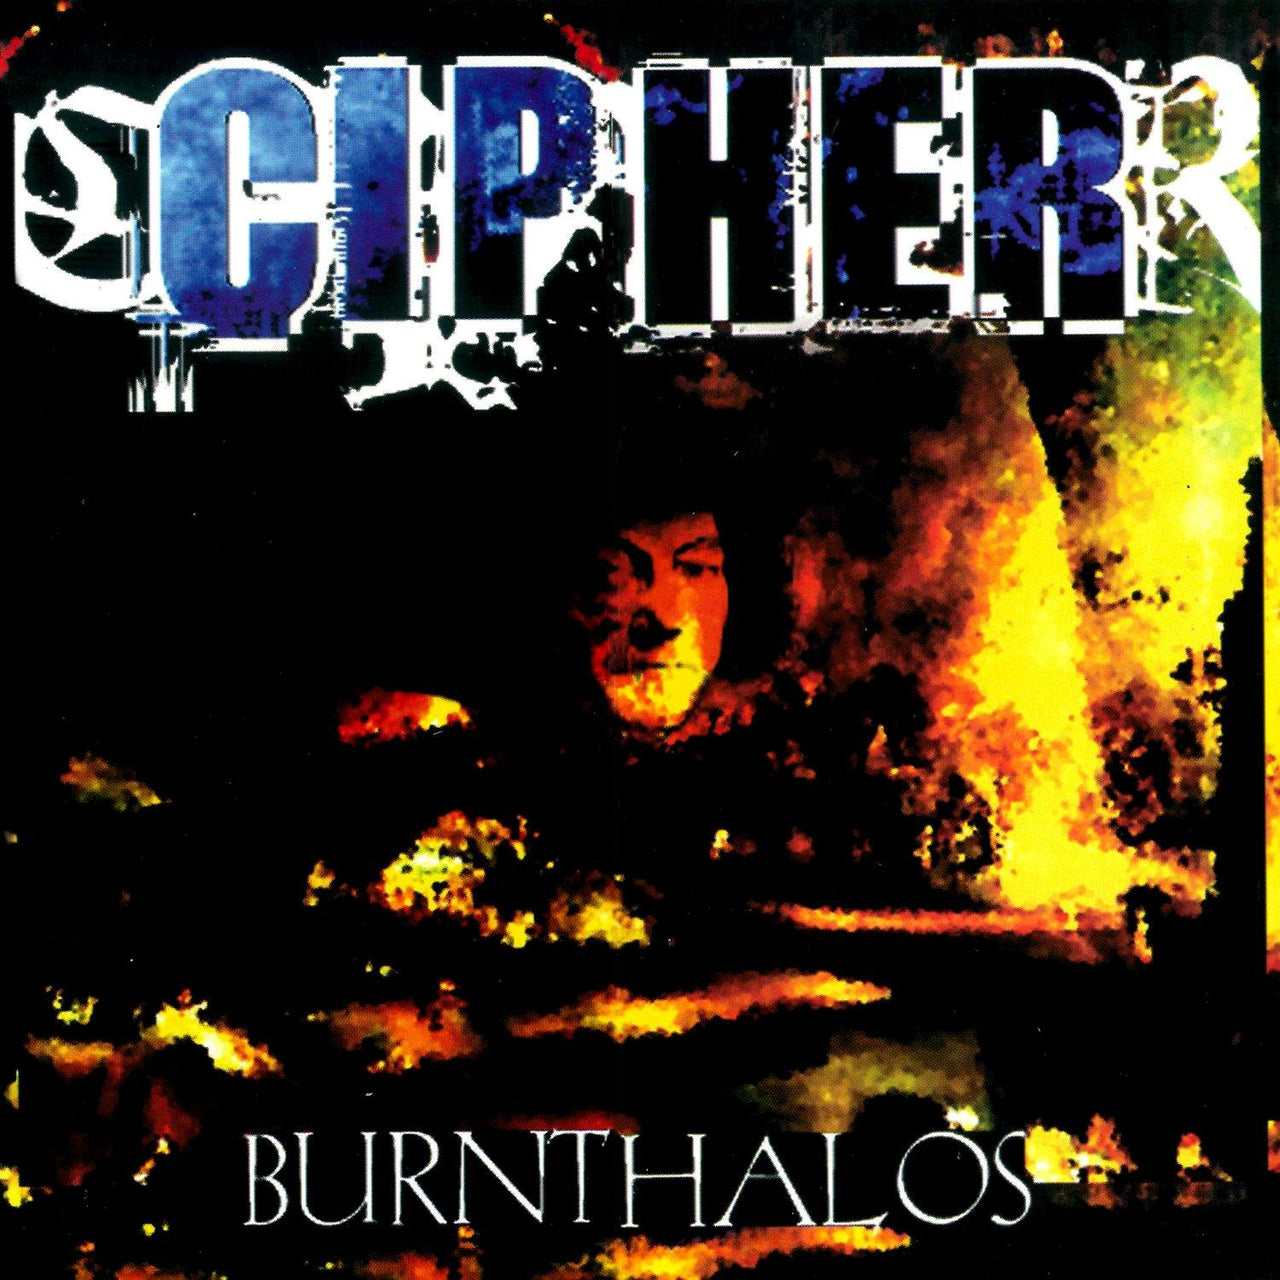 Buy – Cipher "Burnt Halos" 6" – Band & Music Merch – Cold Cuts Merch